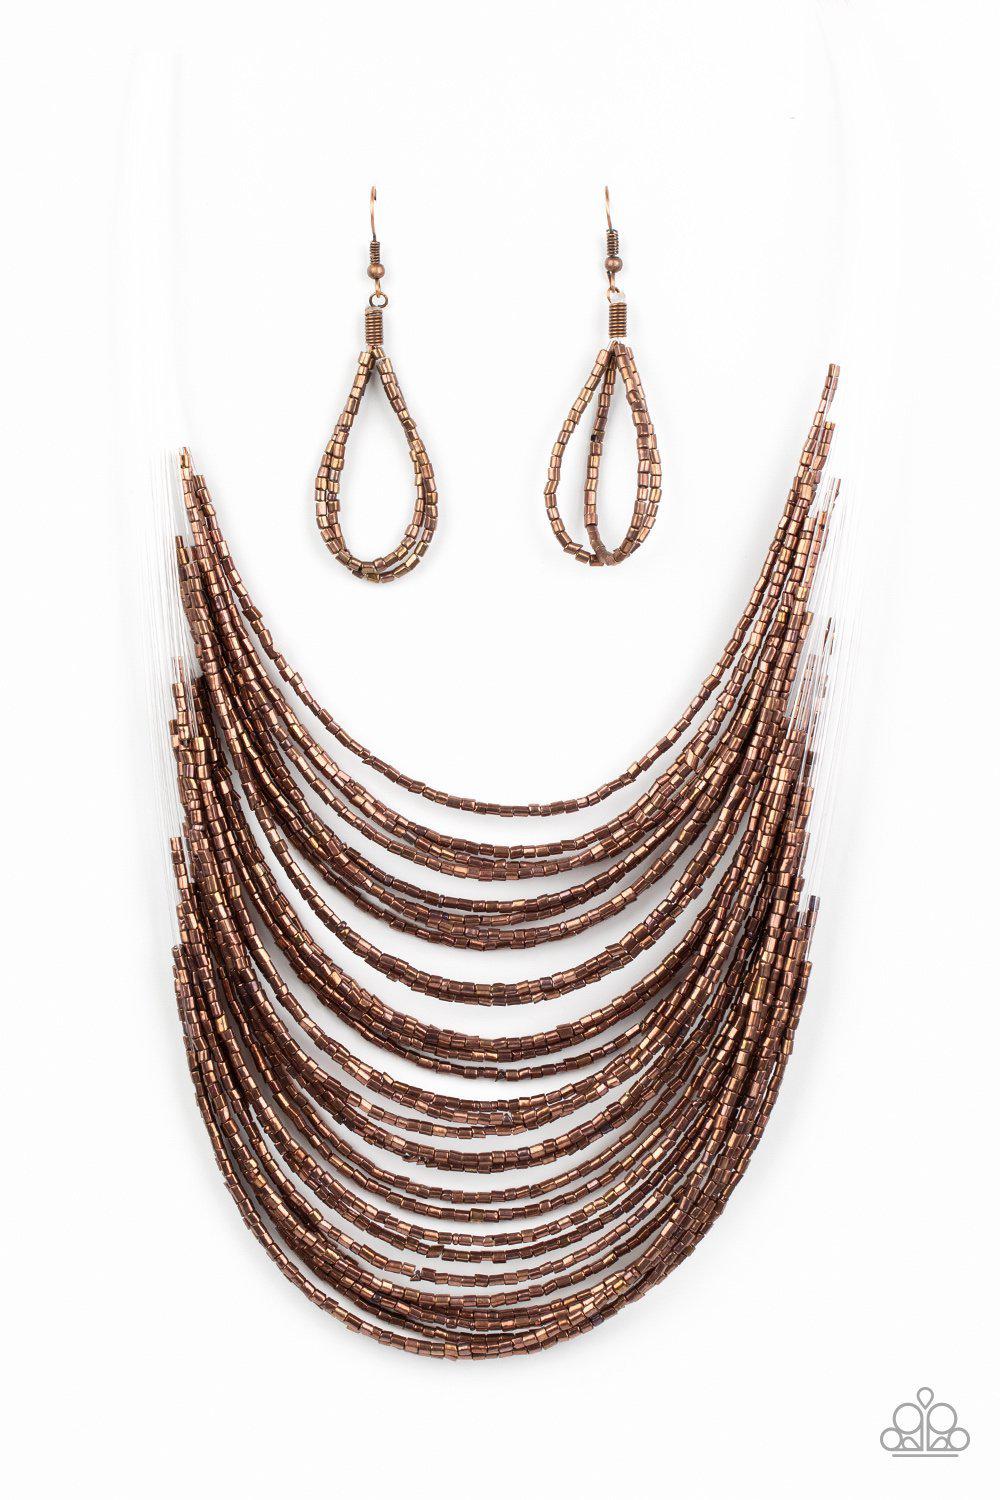 Catwalk Queen Copper Seed Bead Necklace - Paparazzi Accessories-CarasShop.com - $5 Jewelry by Cara Jewels